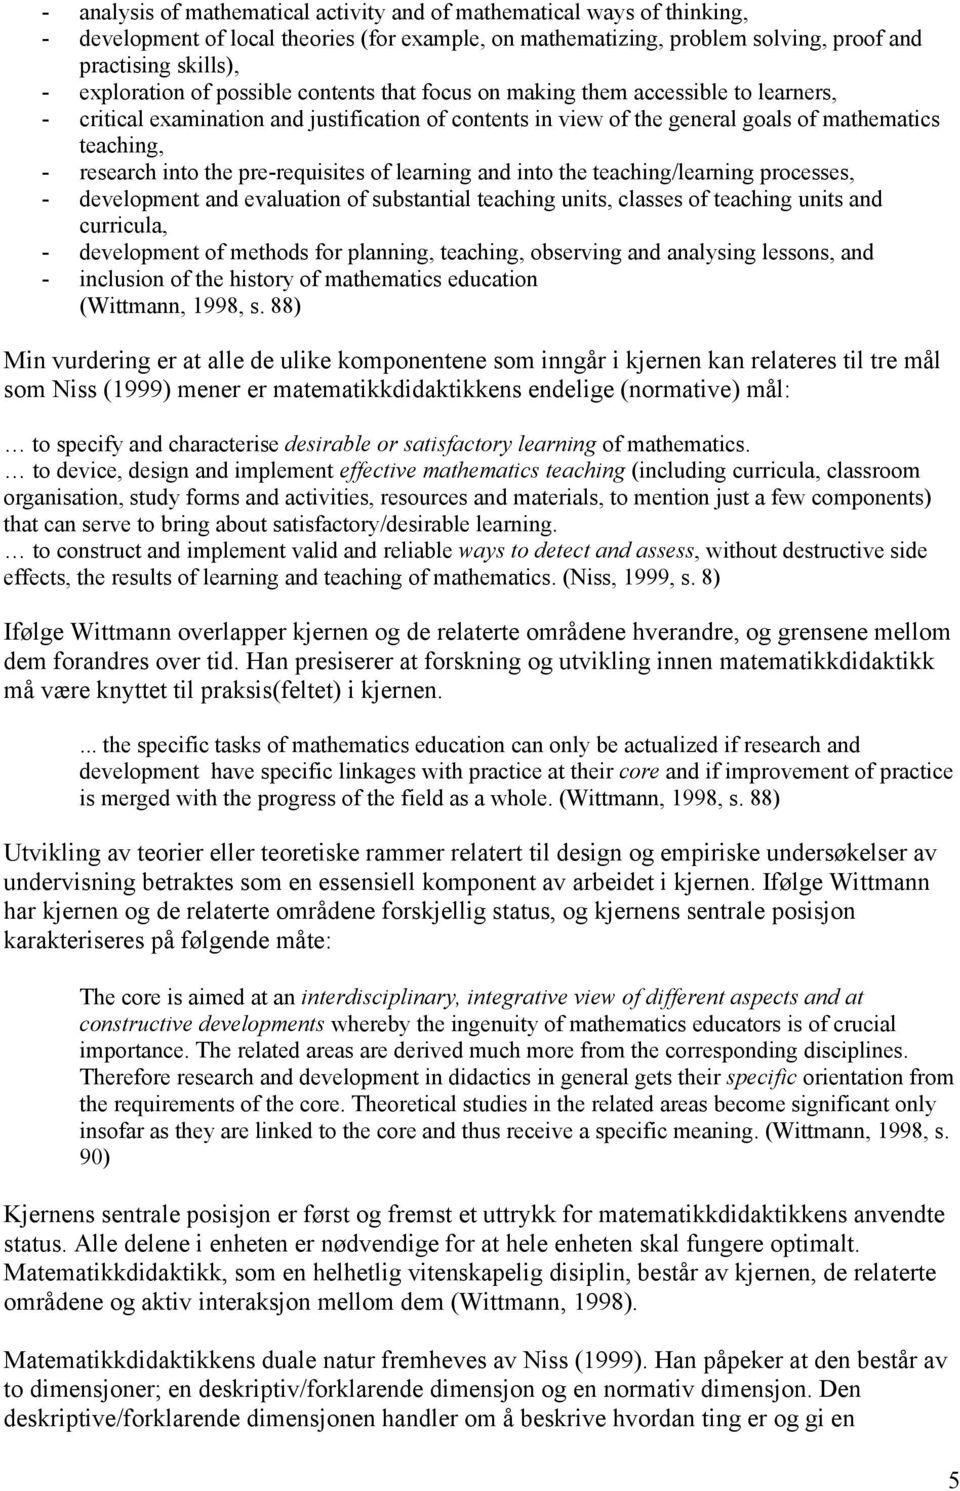 pre-requisites of learning and into the teaching/learning processes, - development and evaluation of substantial teaching units, classes of teaching units and curricula, - development of methods for